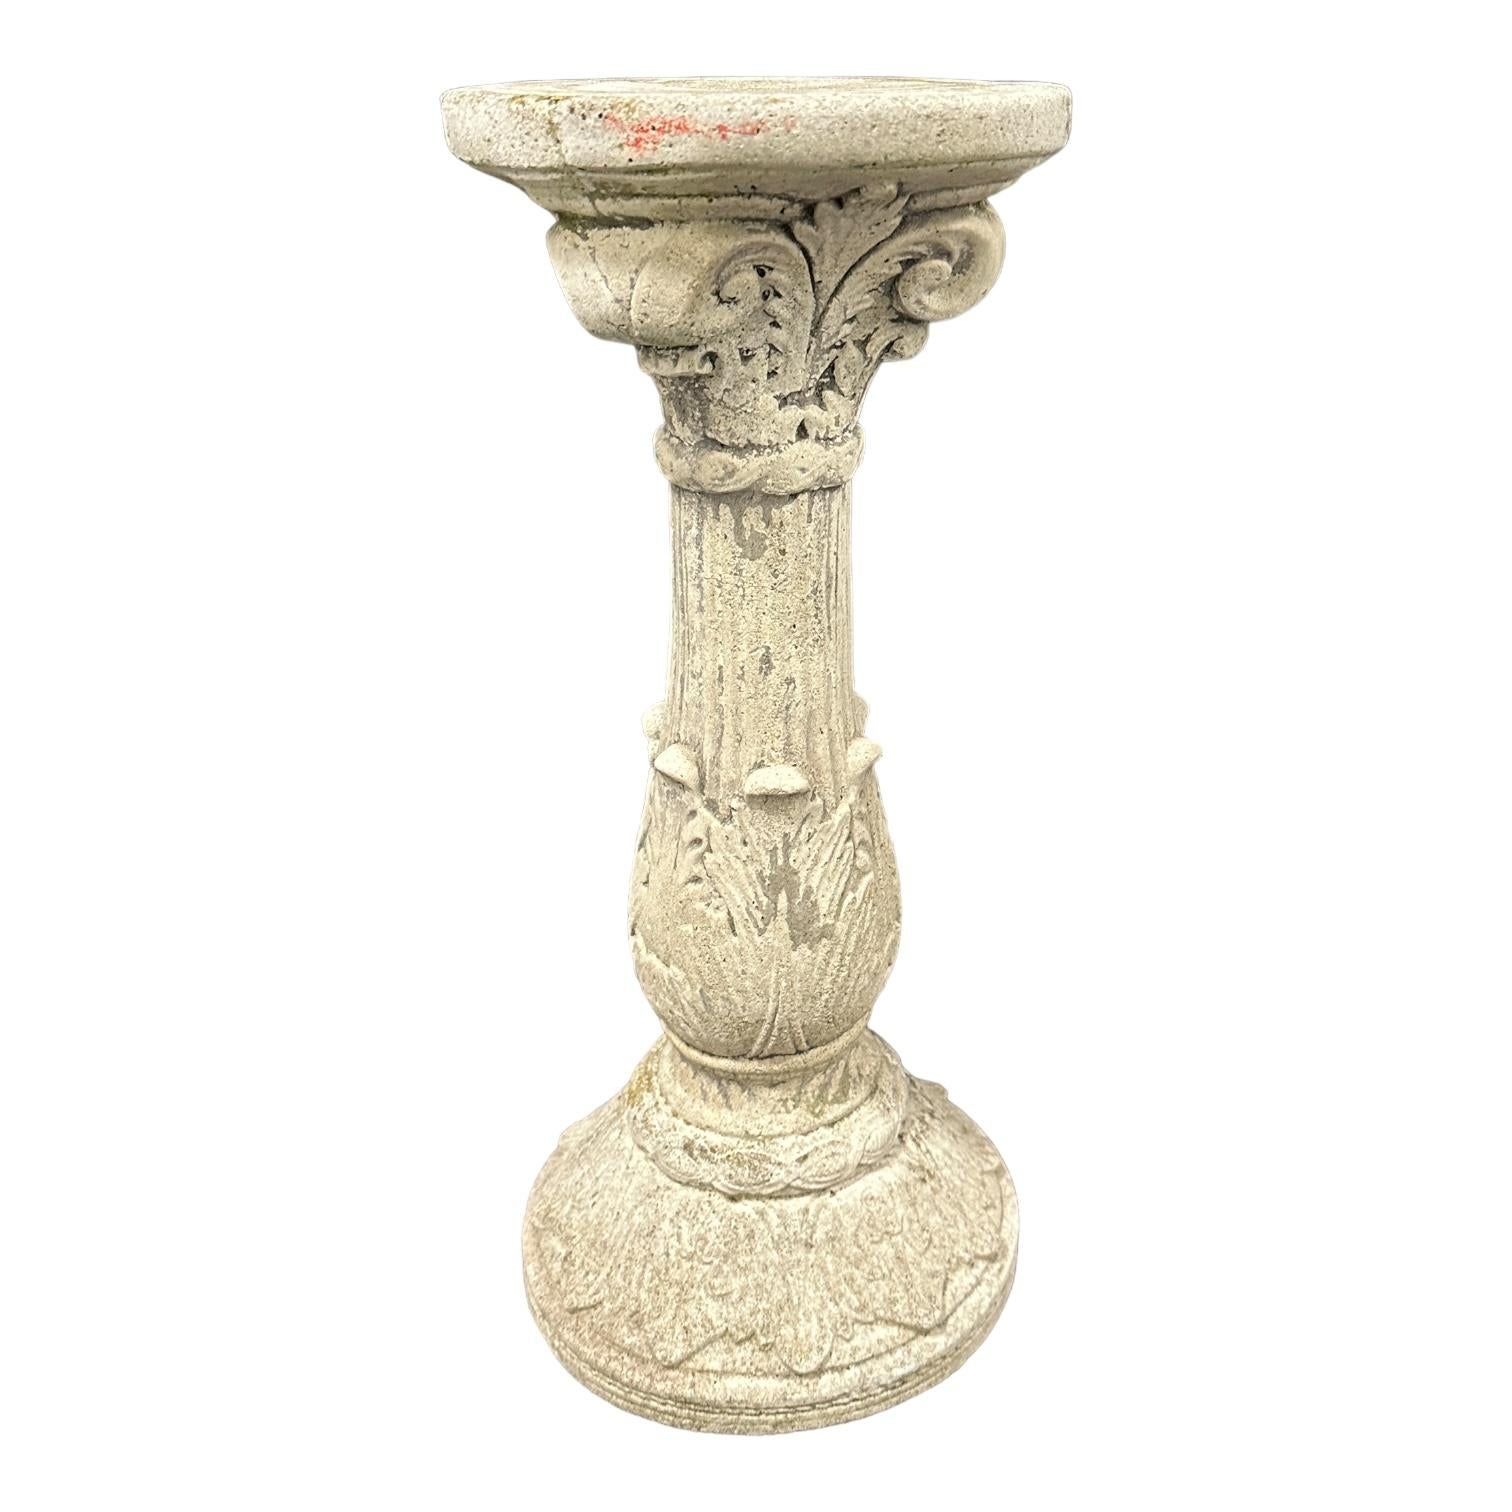 Mid-20th Century Composed Stone, Stone Column, Garden or Yard Decoration Vintage, German, 1950s For Sale